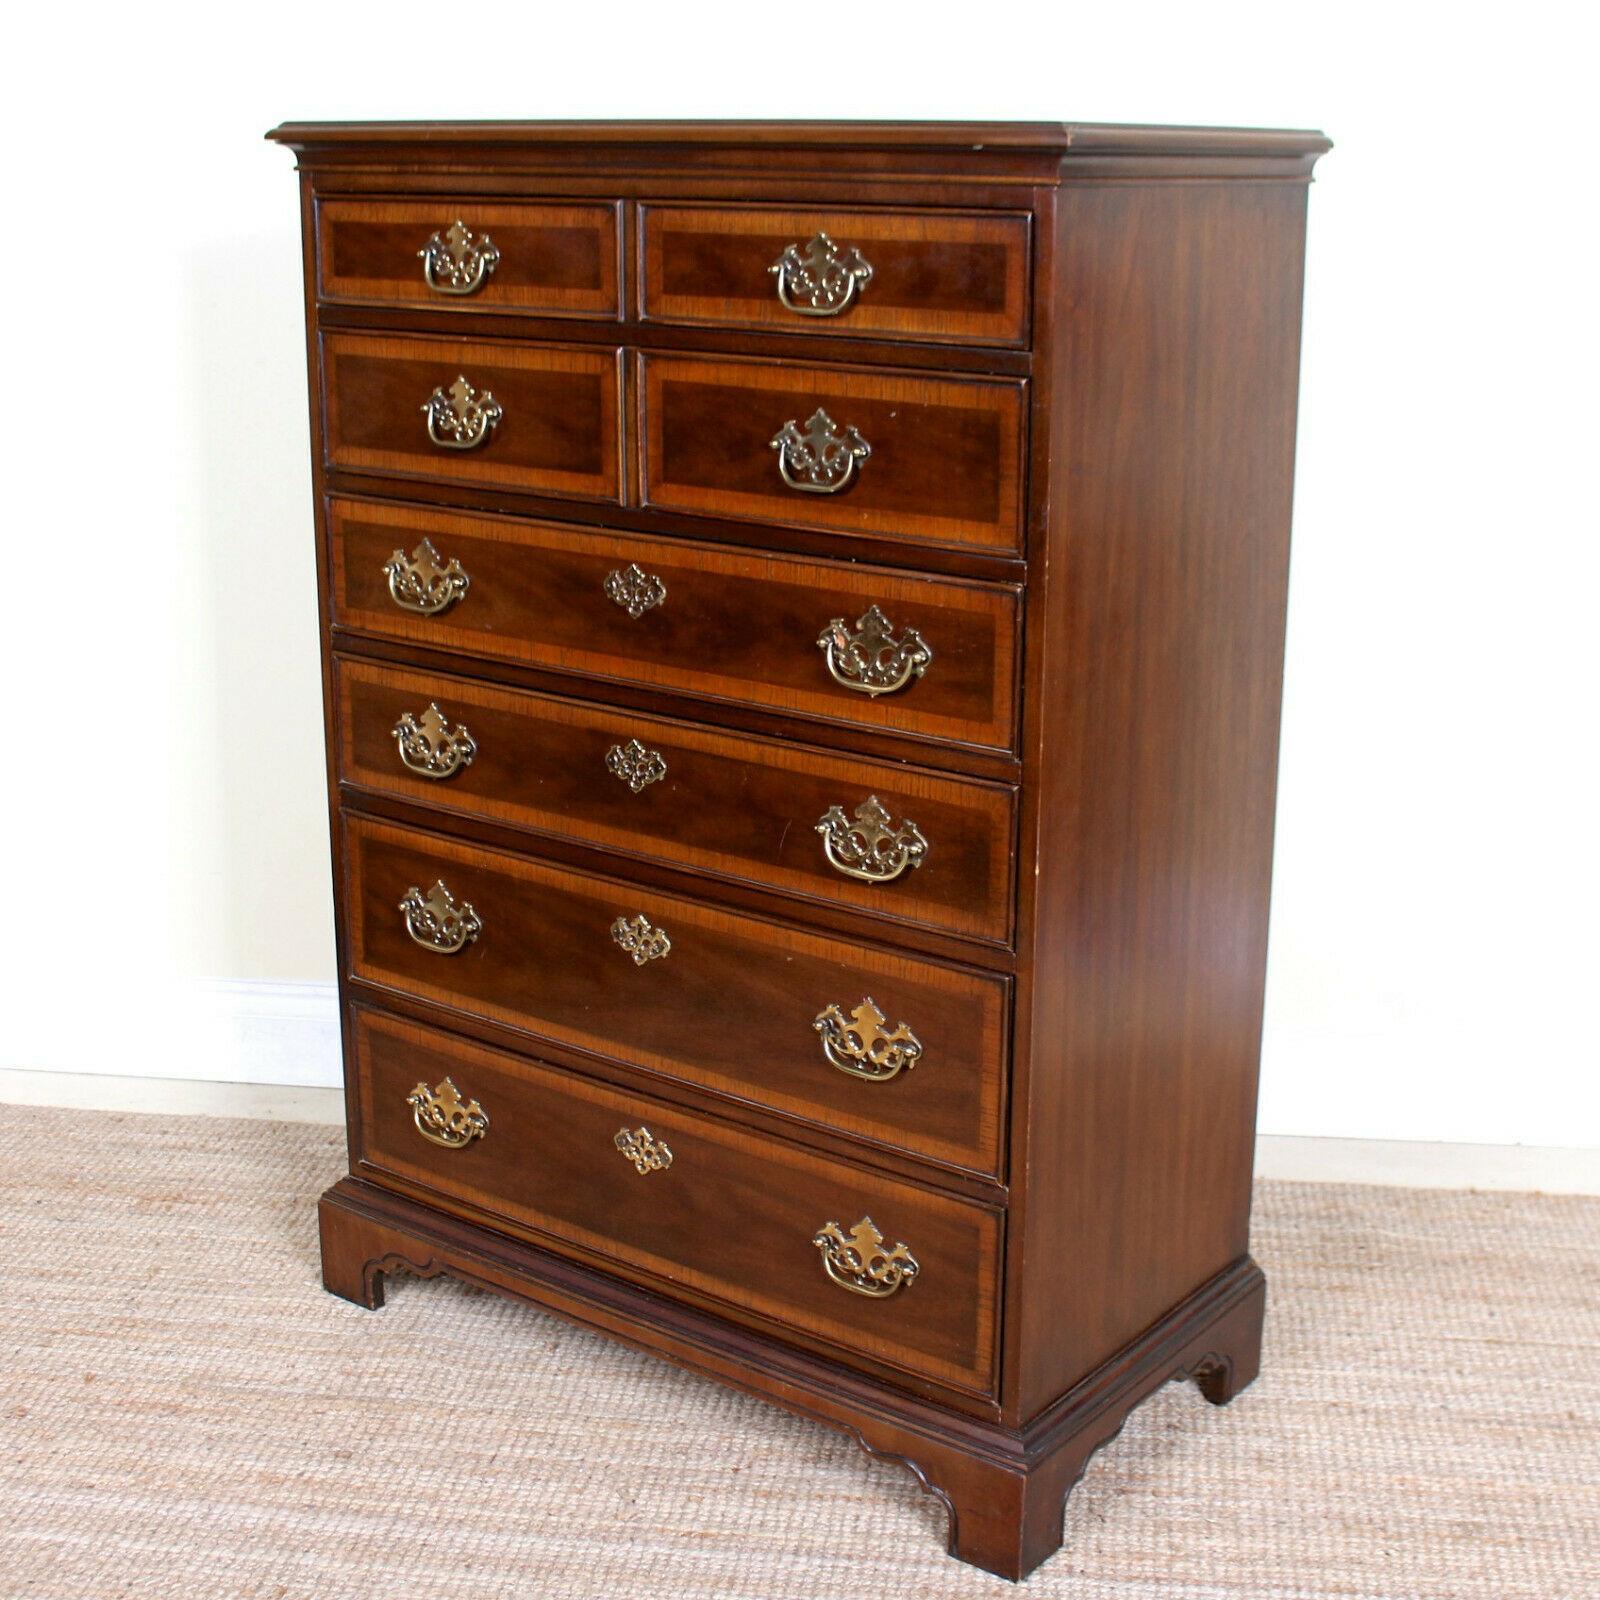 An impressive tallboy chest of drawers in the Chippendale manner by Drexel.

The marquetry inlay adorned drawers mounted with good handles, dovetailed jointing and solid clean interiors. Chamfered edged and raised in a cutaway plinth base